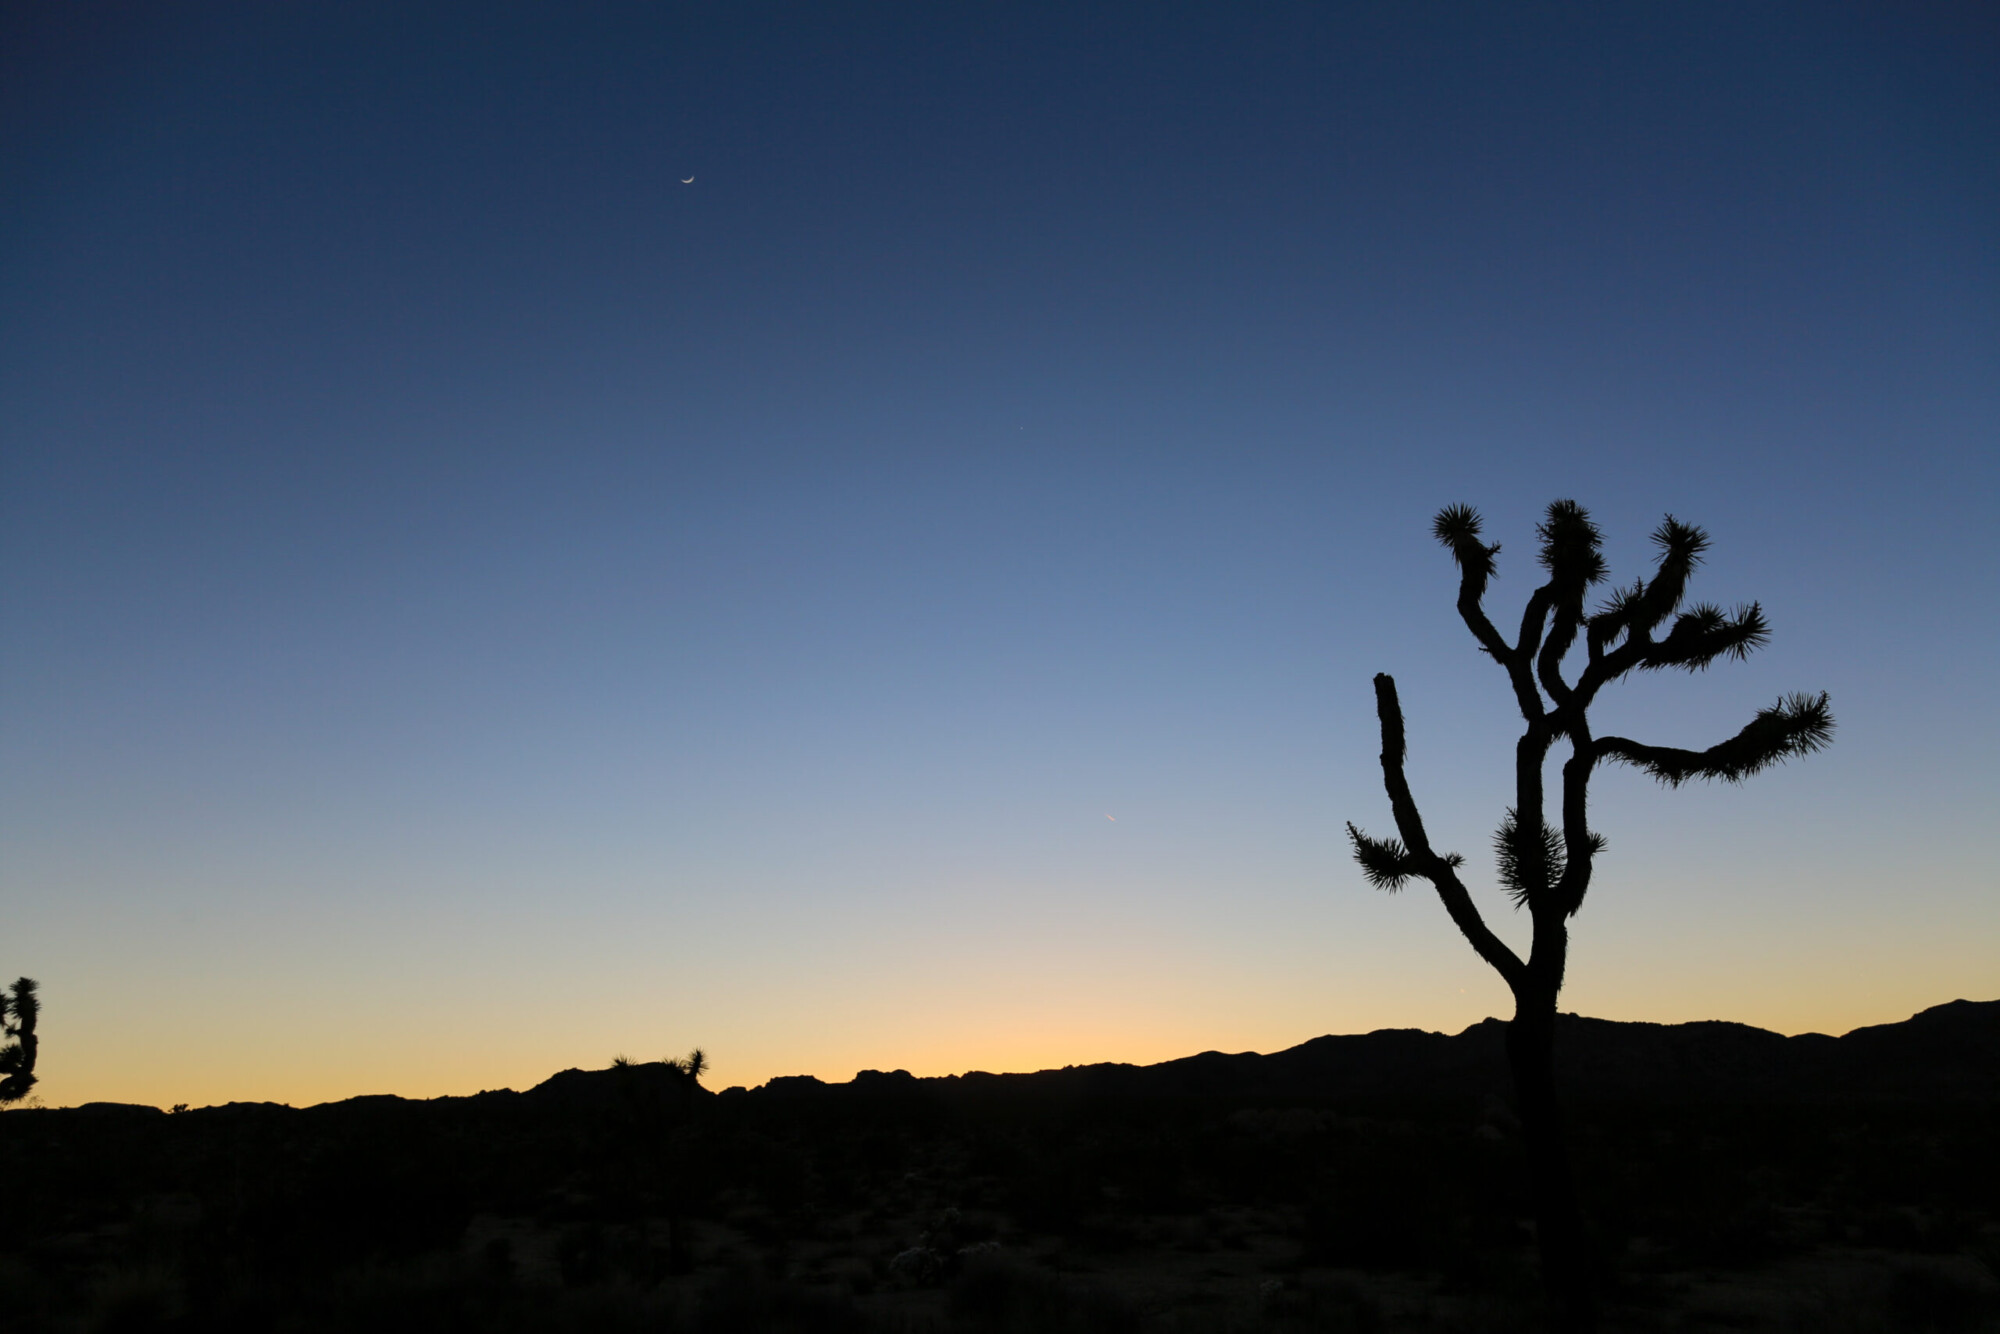 Sunset silhouette of a Joshua Tree against a yellow and blue sky in Joshua Tree National Park, California.